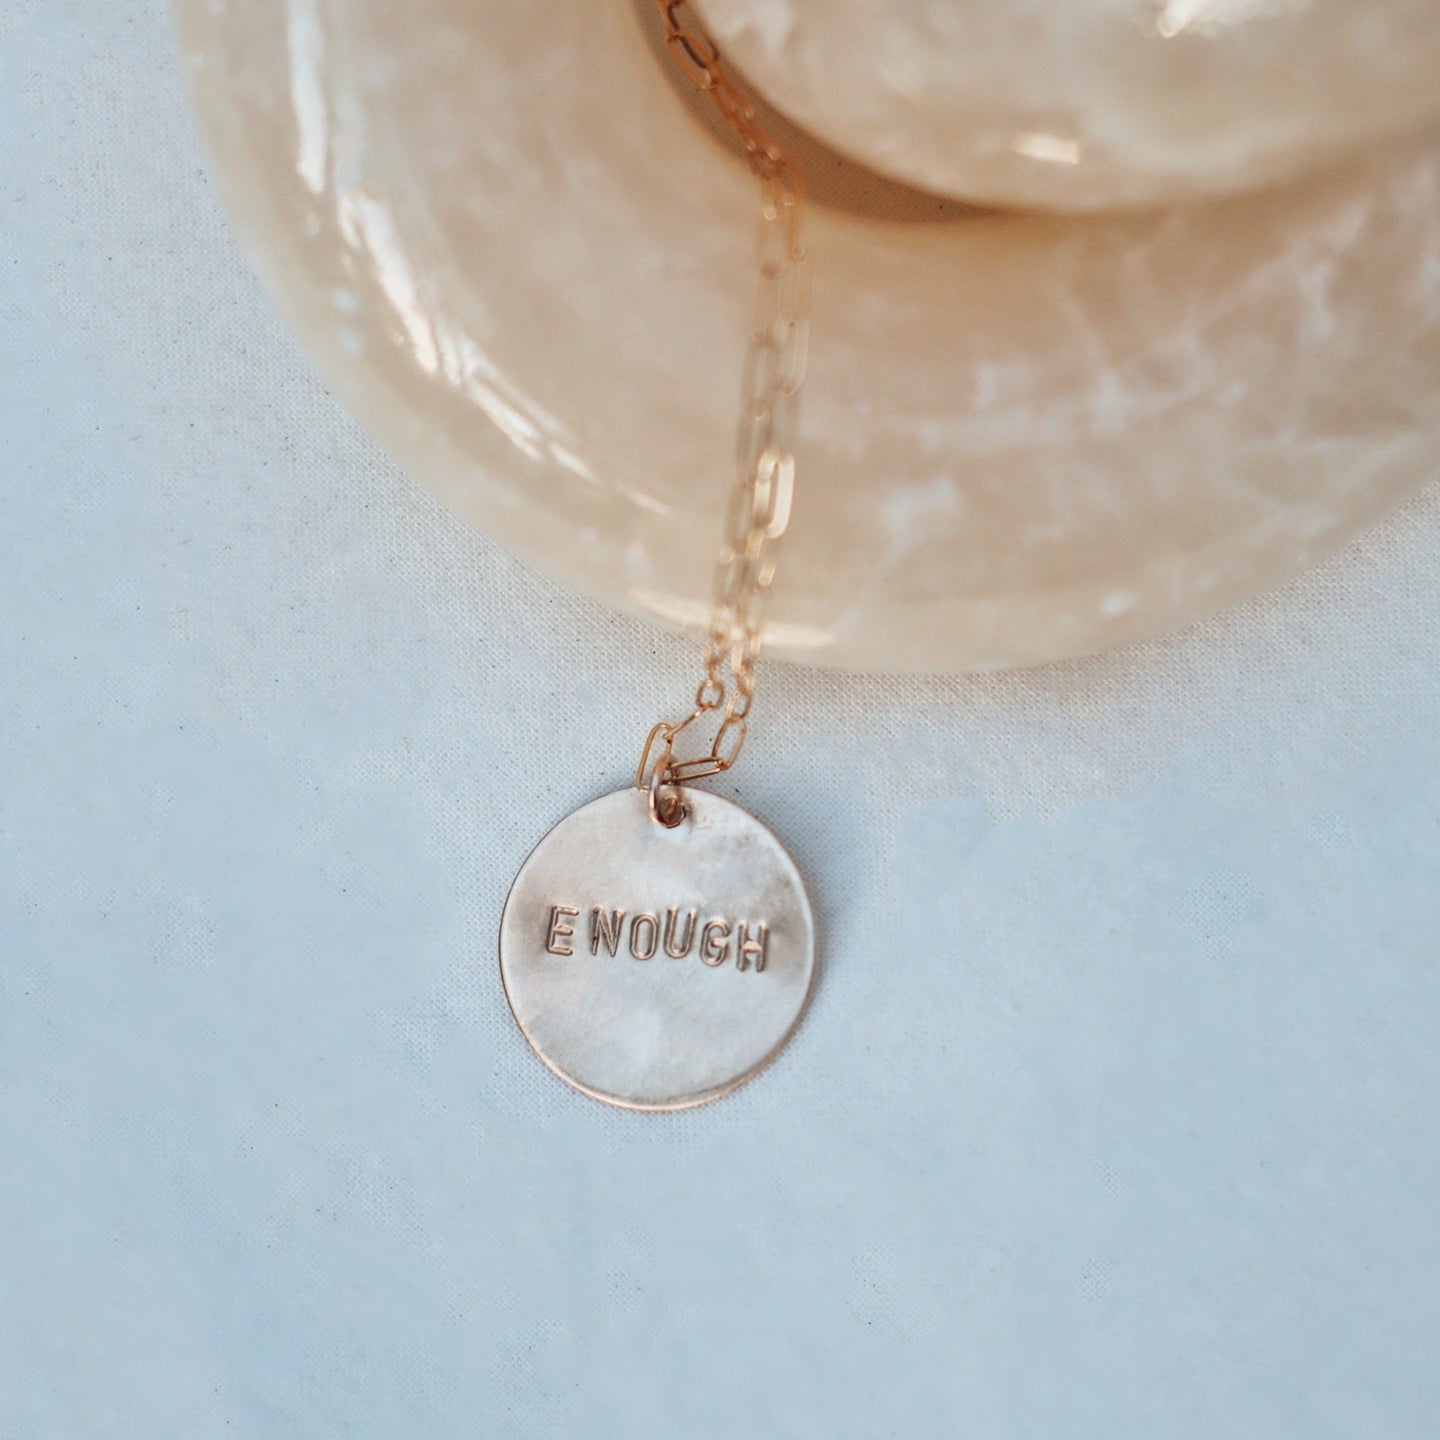 ENOUGH necklace (Gold-filled , Sterling Silver)